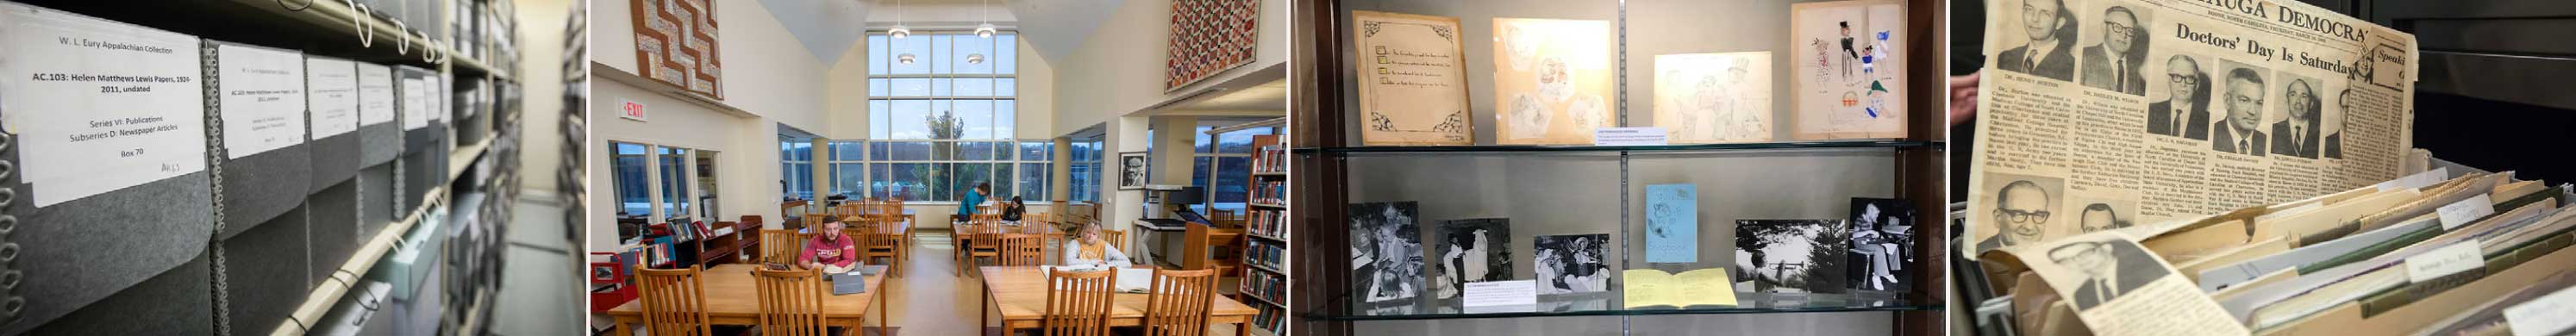 photo collage of SCRC phase boxes, reading room, exhibit, and historical newspapers